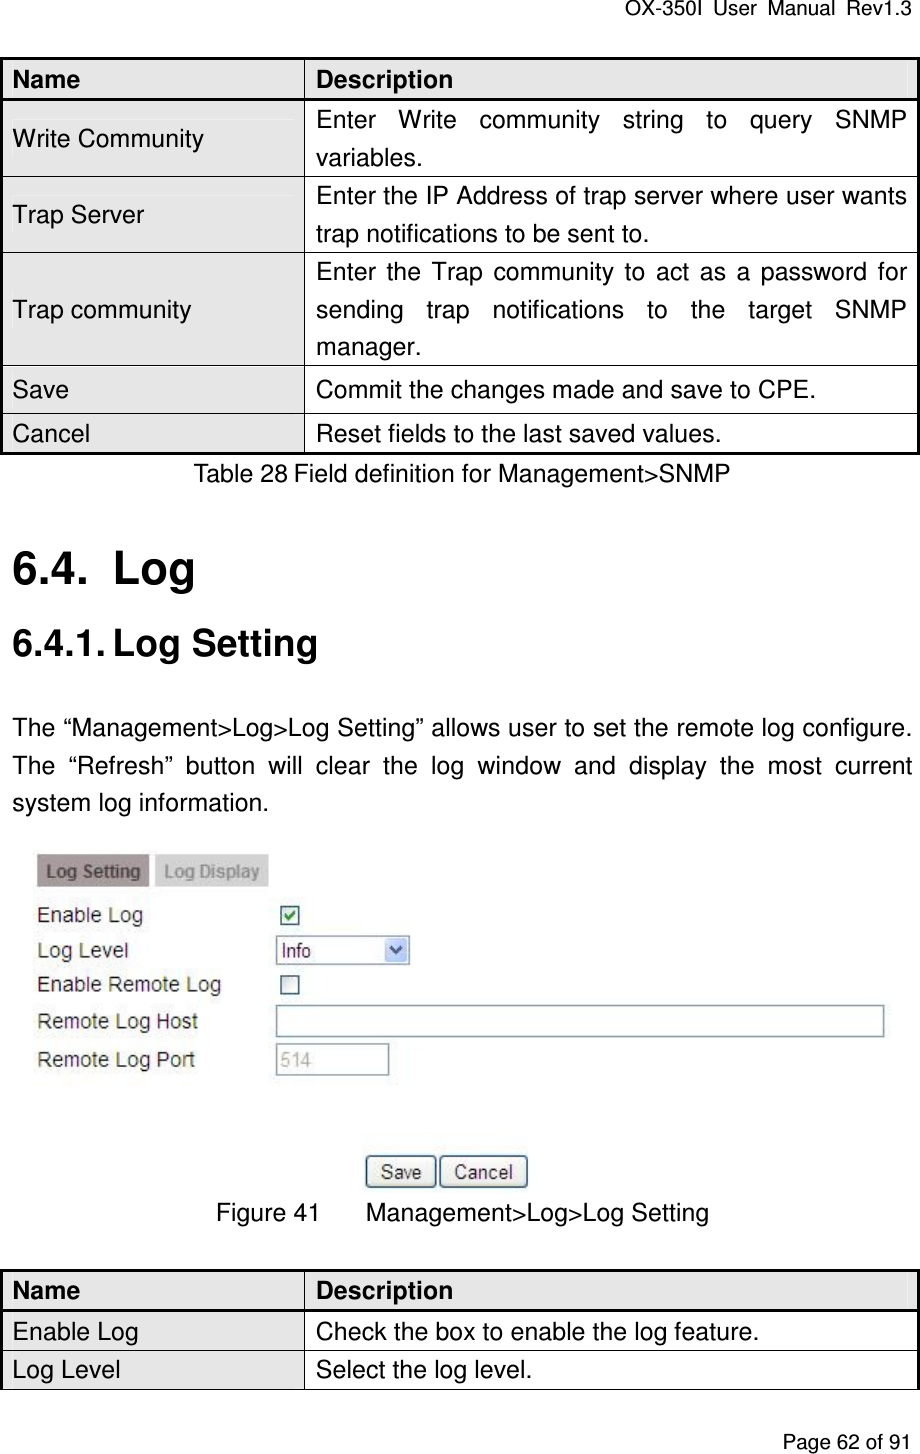 OX-350I  User  Manual  Rev1.3 Page 62 of 91 Name  Description Write Community  Enter  Write  community  string  to  query  SNMP variables. Trap Server  Enter the IP Address of trap server where user wants trap notifications to be sent to. Trap community Enter  the  Trap  community  to  act  as  a  password  for sending  trap  notifications  to  the  target  SNMP manager. Save  Commit the changes made and save to CPE. Cancel  Reset fields to the last saved values. Table 28 Field definition for Management&gt;SNMP 6.4.  Log 6.4.1. Log Setting The “Management&gt;Log&gt;Log Setting” allows user to set the remote log configure. The  “Refresh”  button  will  clear  the  log  window  and  display  the  most  current system log information.  Figure 41  Management&gt;Log&gt;Log Setting Name  Description Enable Log  Check the box to enable the log feature. Log Level  Select the log level. 